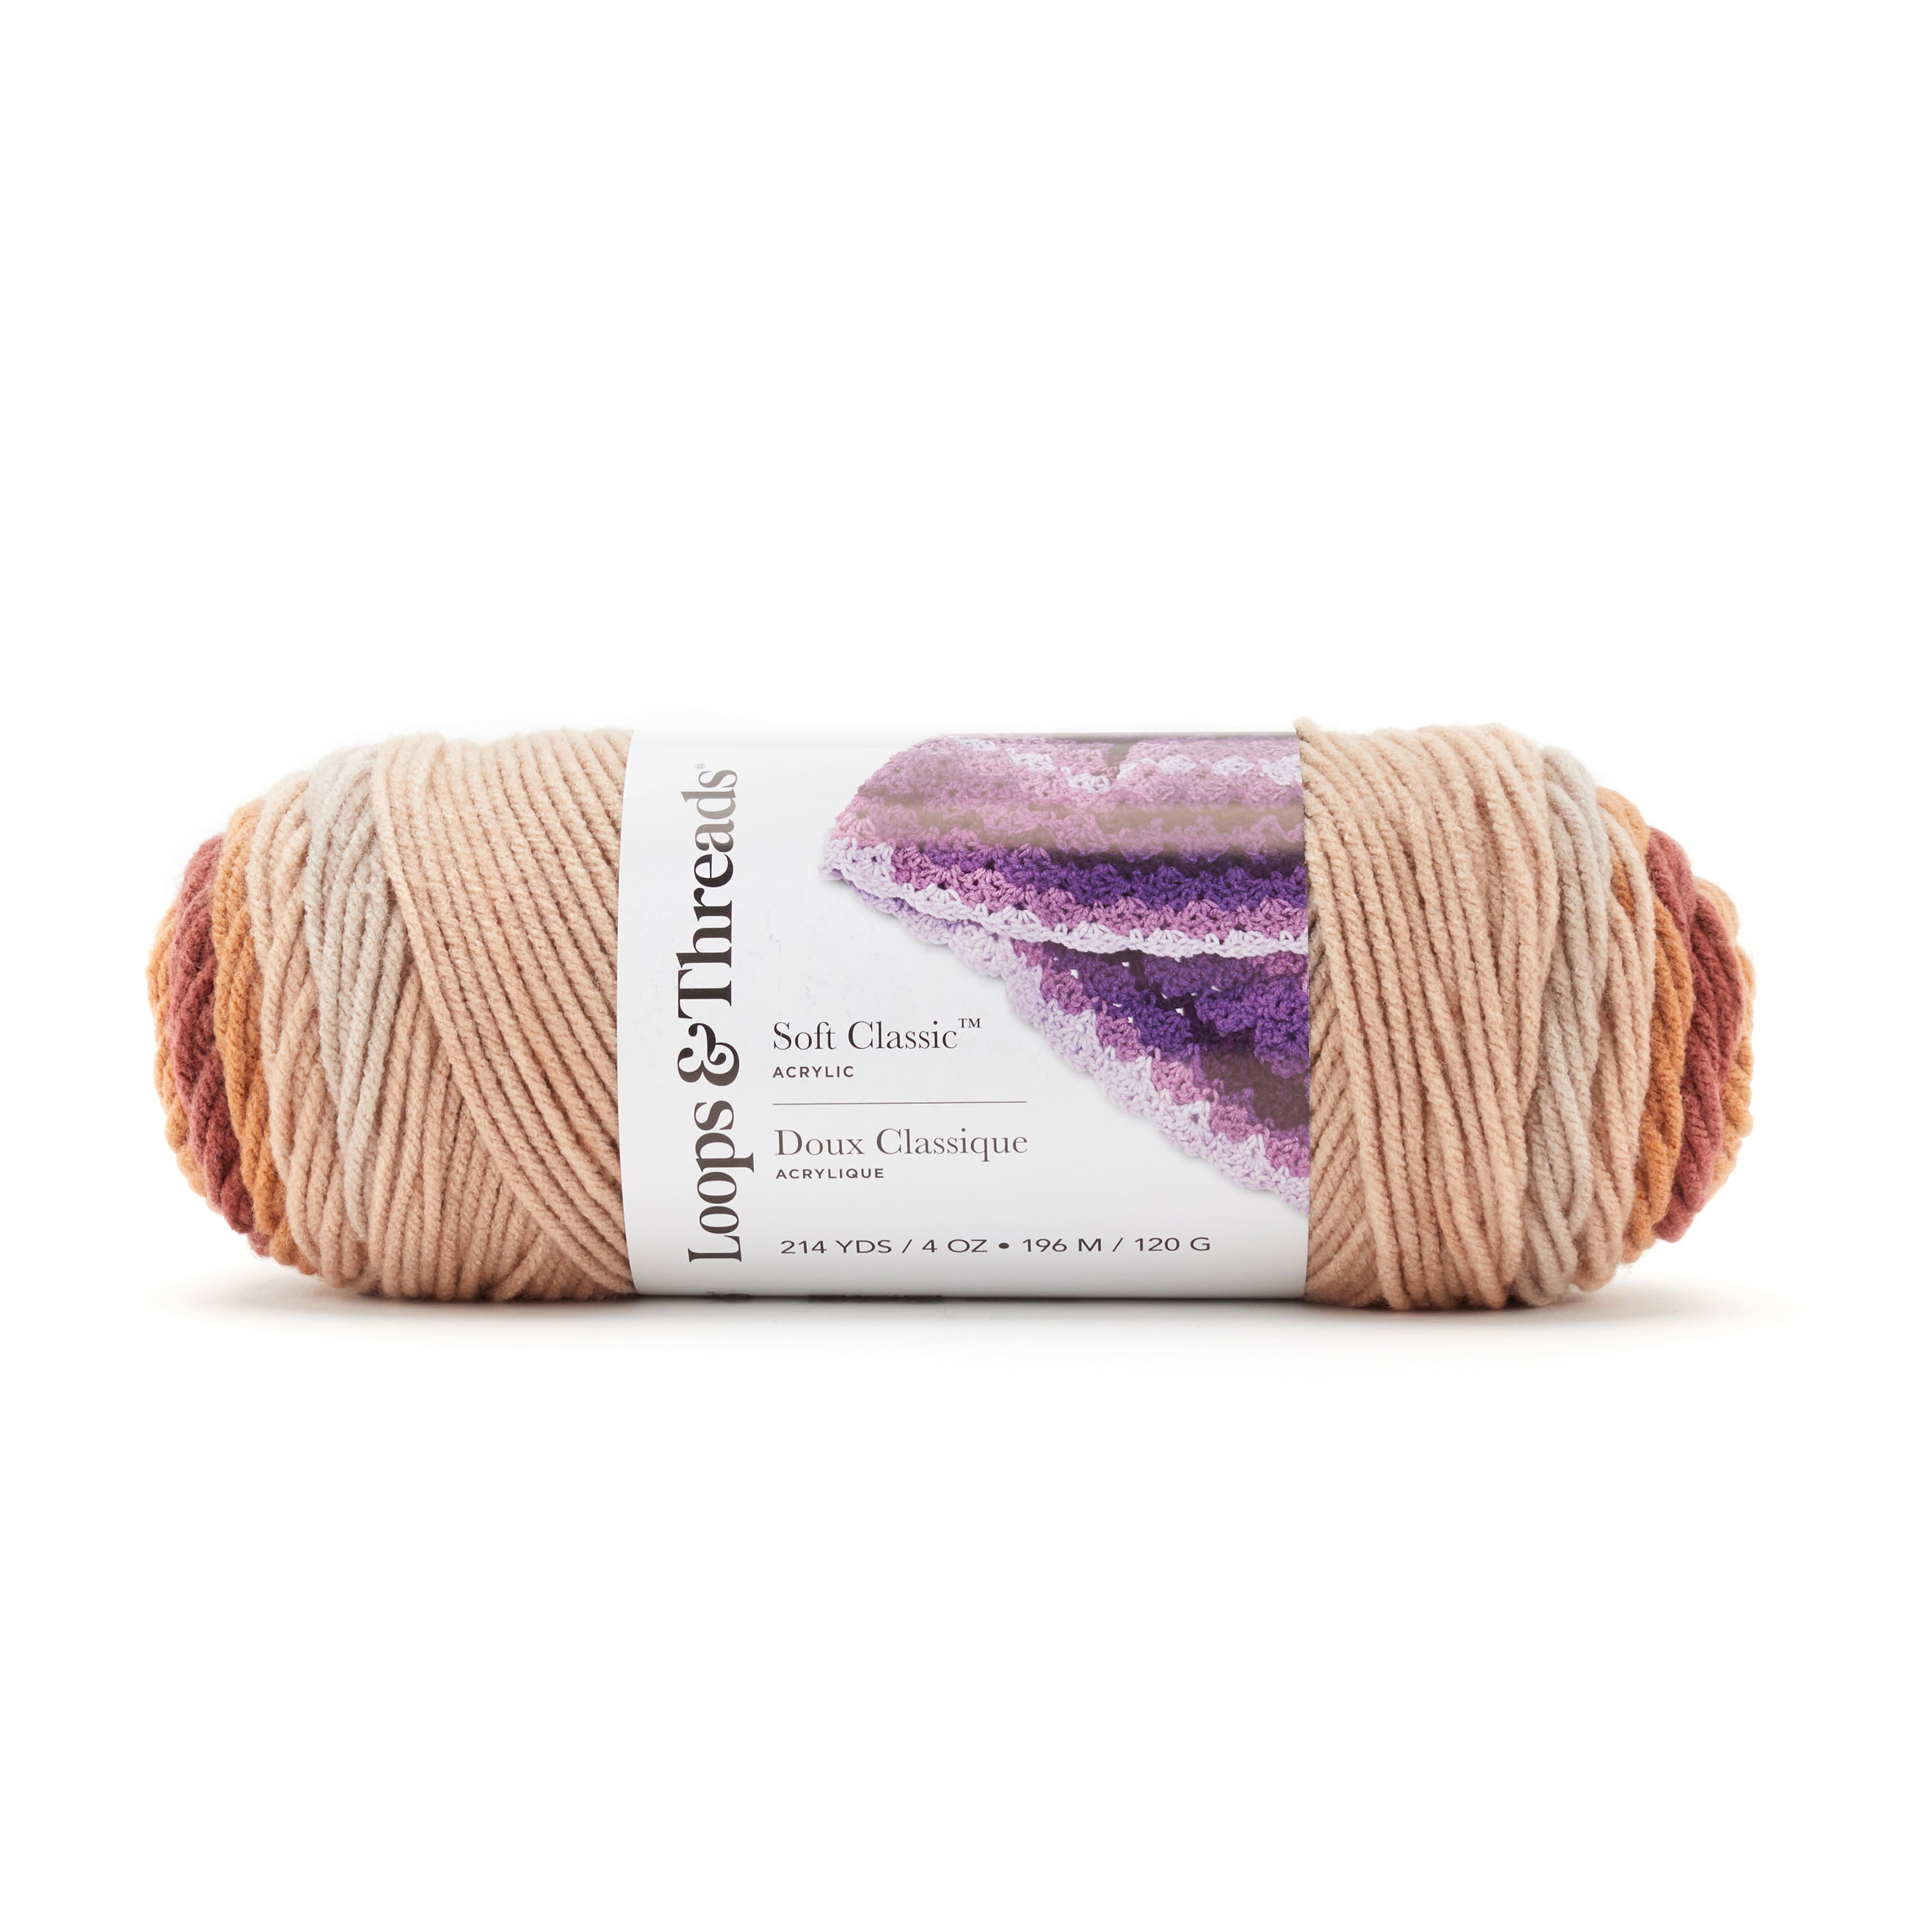 Ombre Hues Yarn by Loops & Threads in Dark pink/rose Cream | 5.29 | Michaels